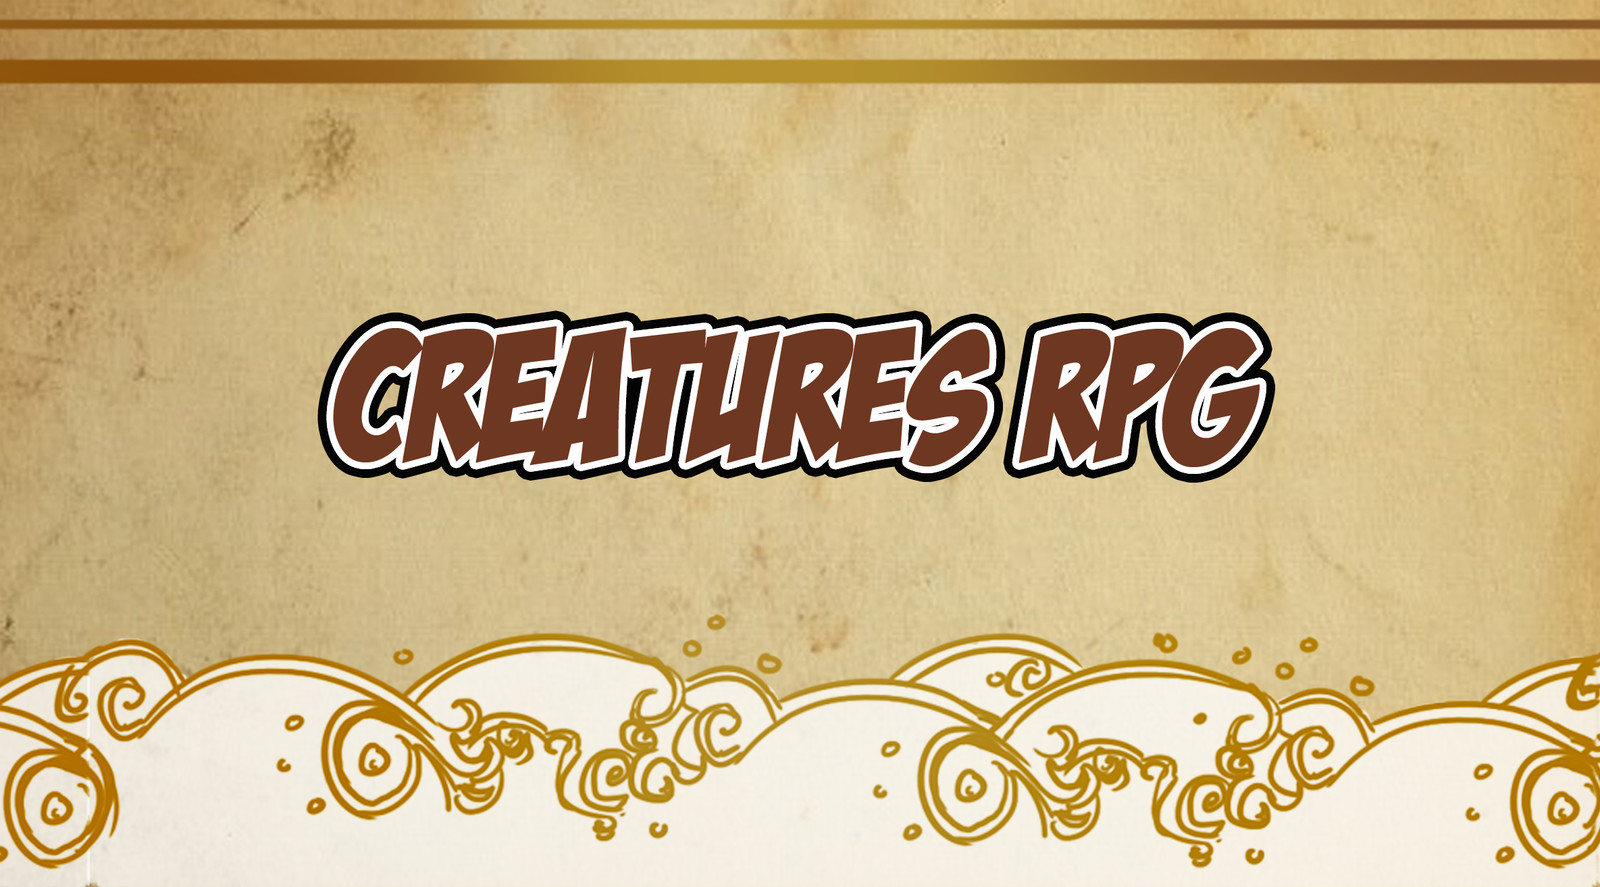 At Playdom I worked on a game tentatively titled Creatures RPG. The art style was based upon the idea that the world was a paper pop up book. All the characters and environments would layer on top of each other like the sliding pieces of a pop up book. Un